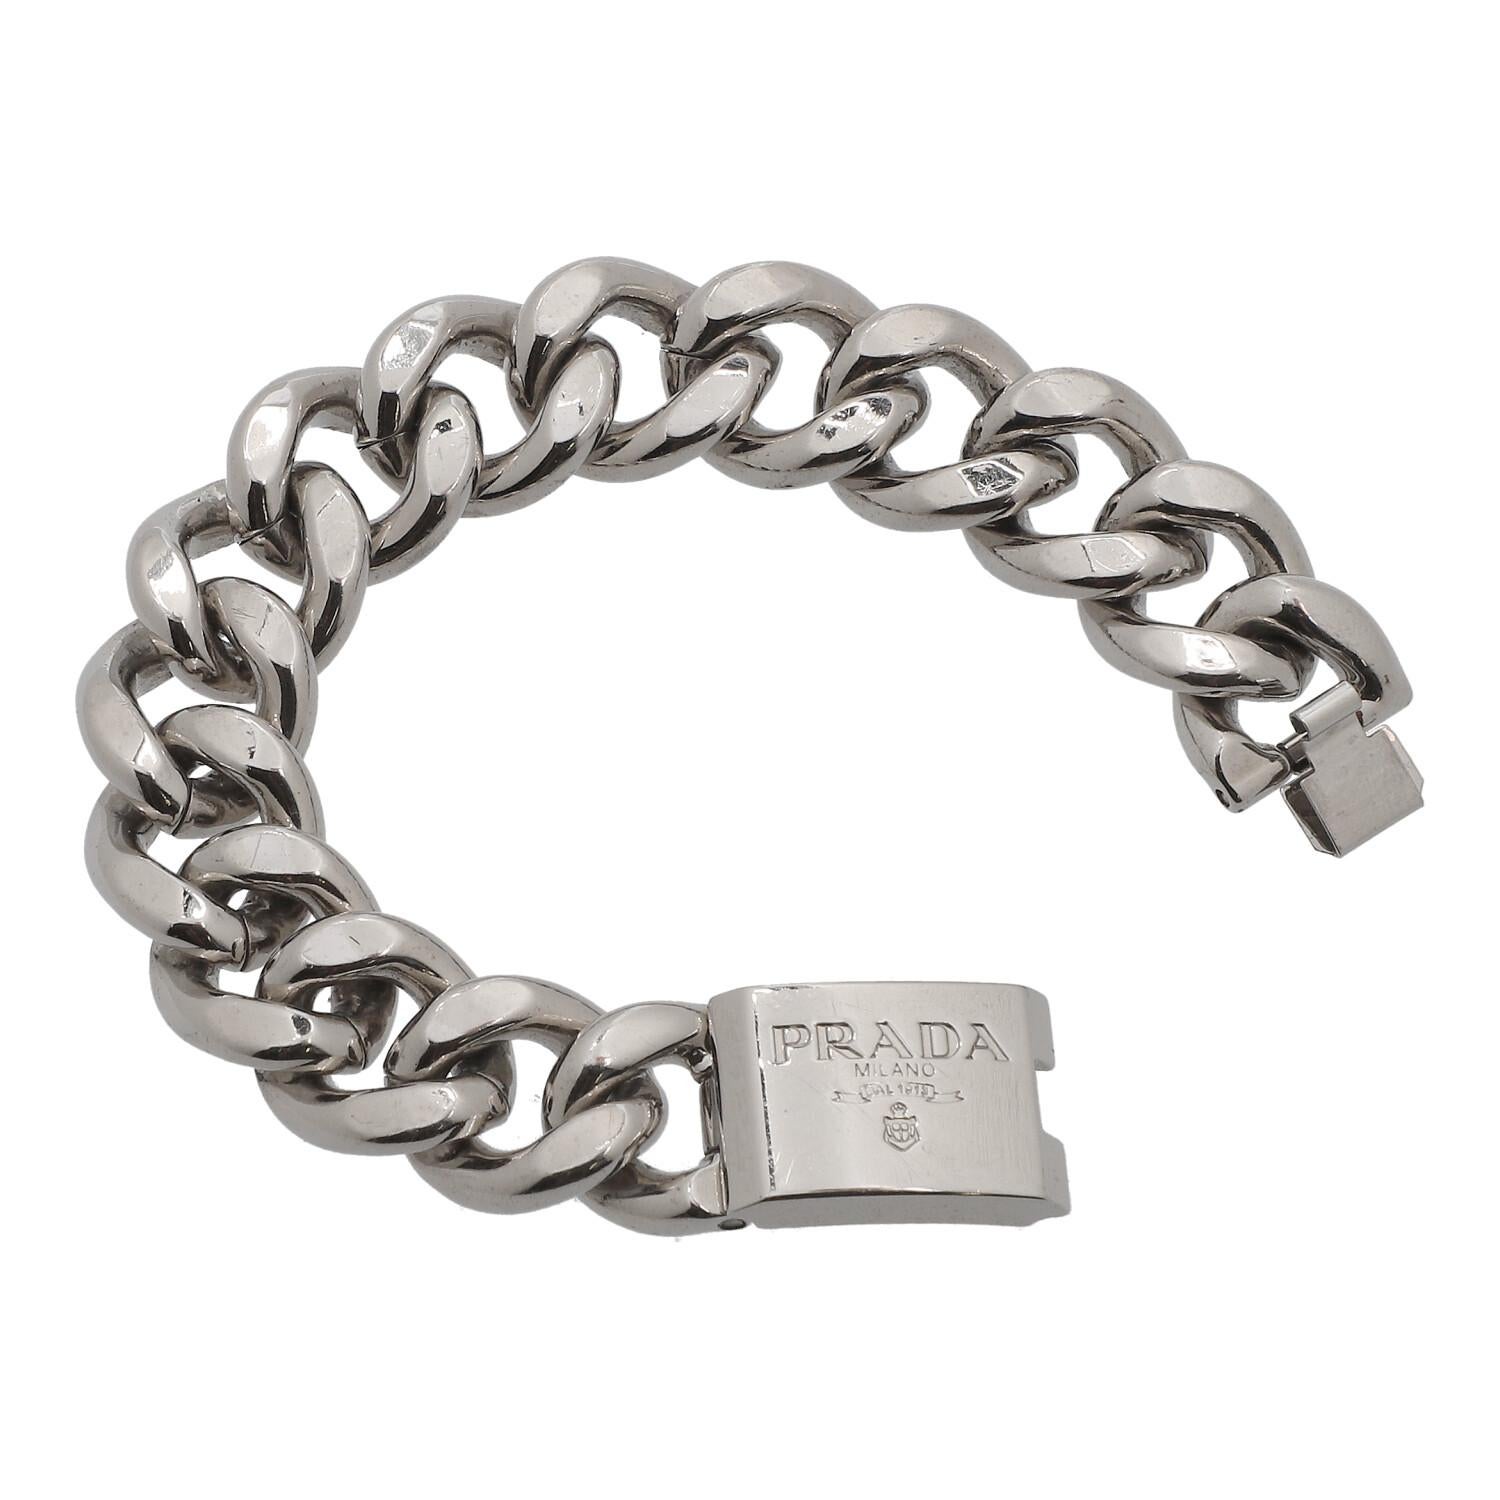 Silver colored curb chain with logo detail on the clasp. Case attached. scratches present. L.: 19 cm.
